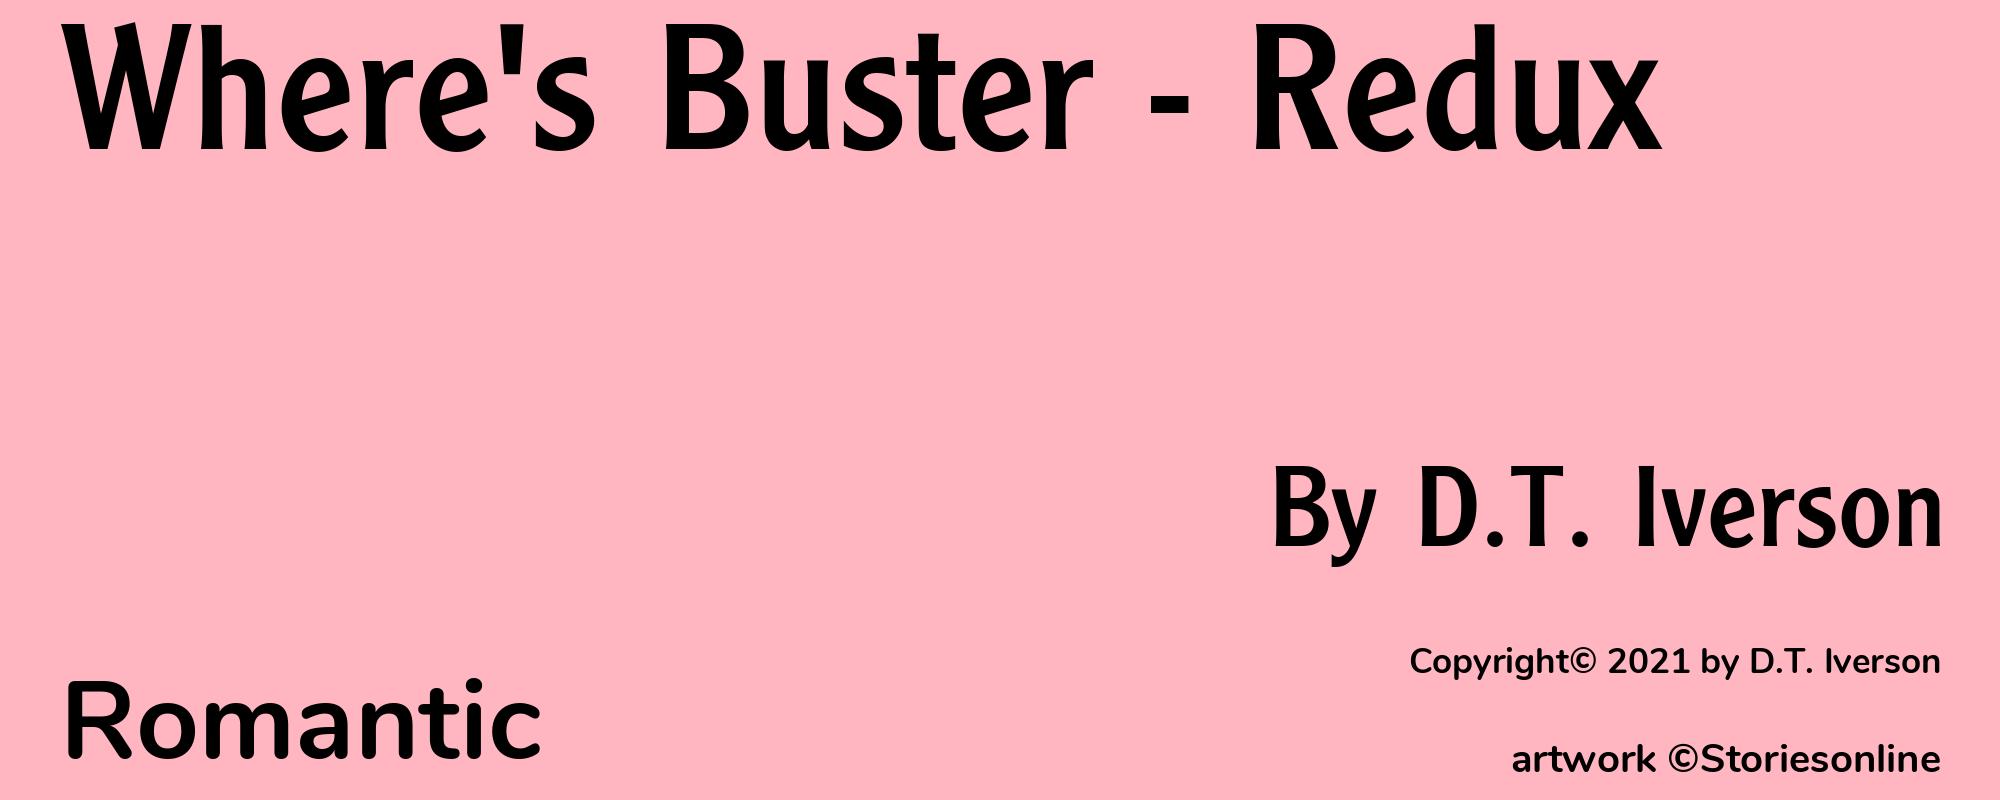 Where's Buster - Redux - Cover